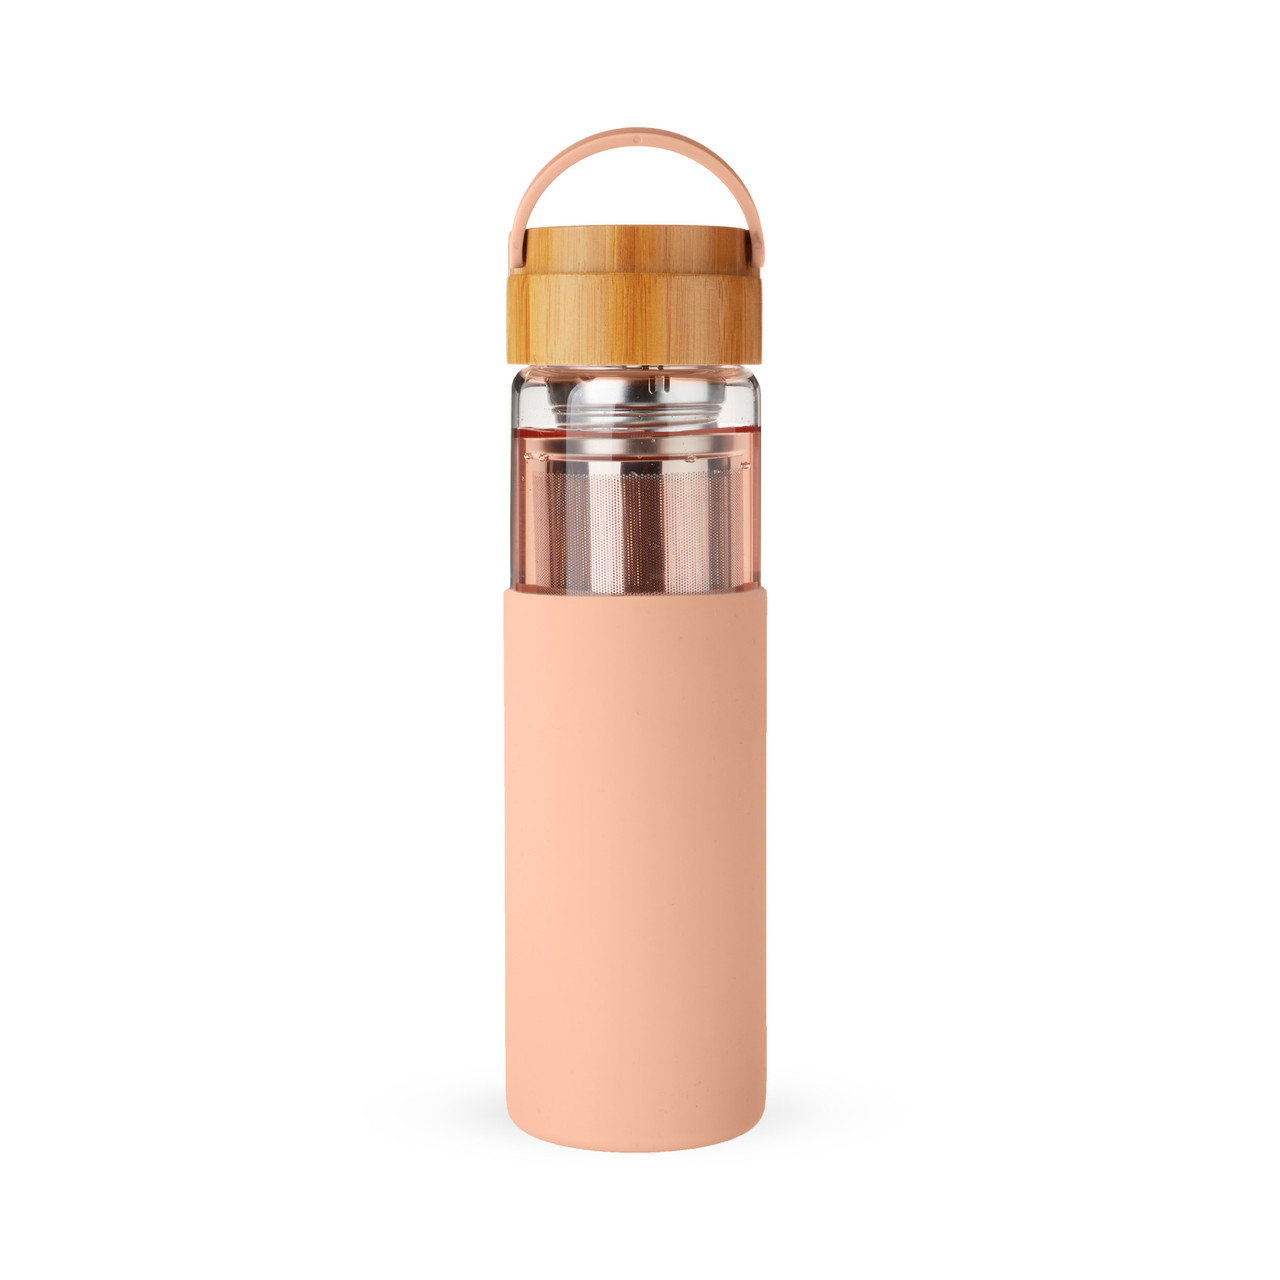 Dana Glass Travel Mug in Coral by Pinky Up